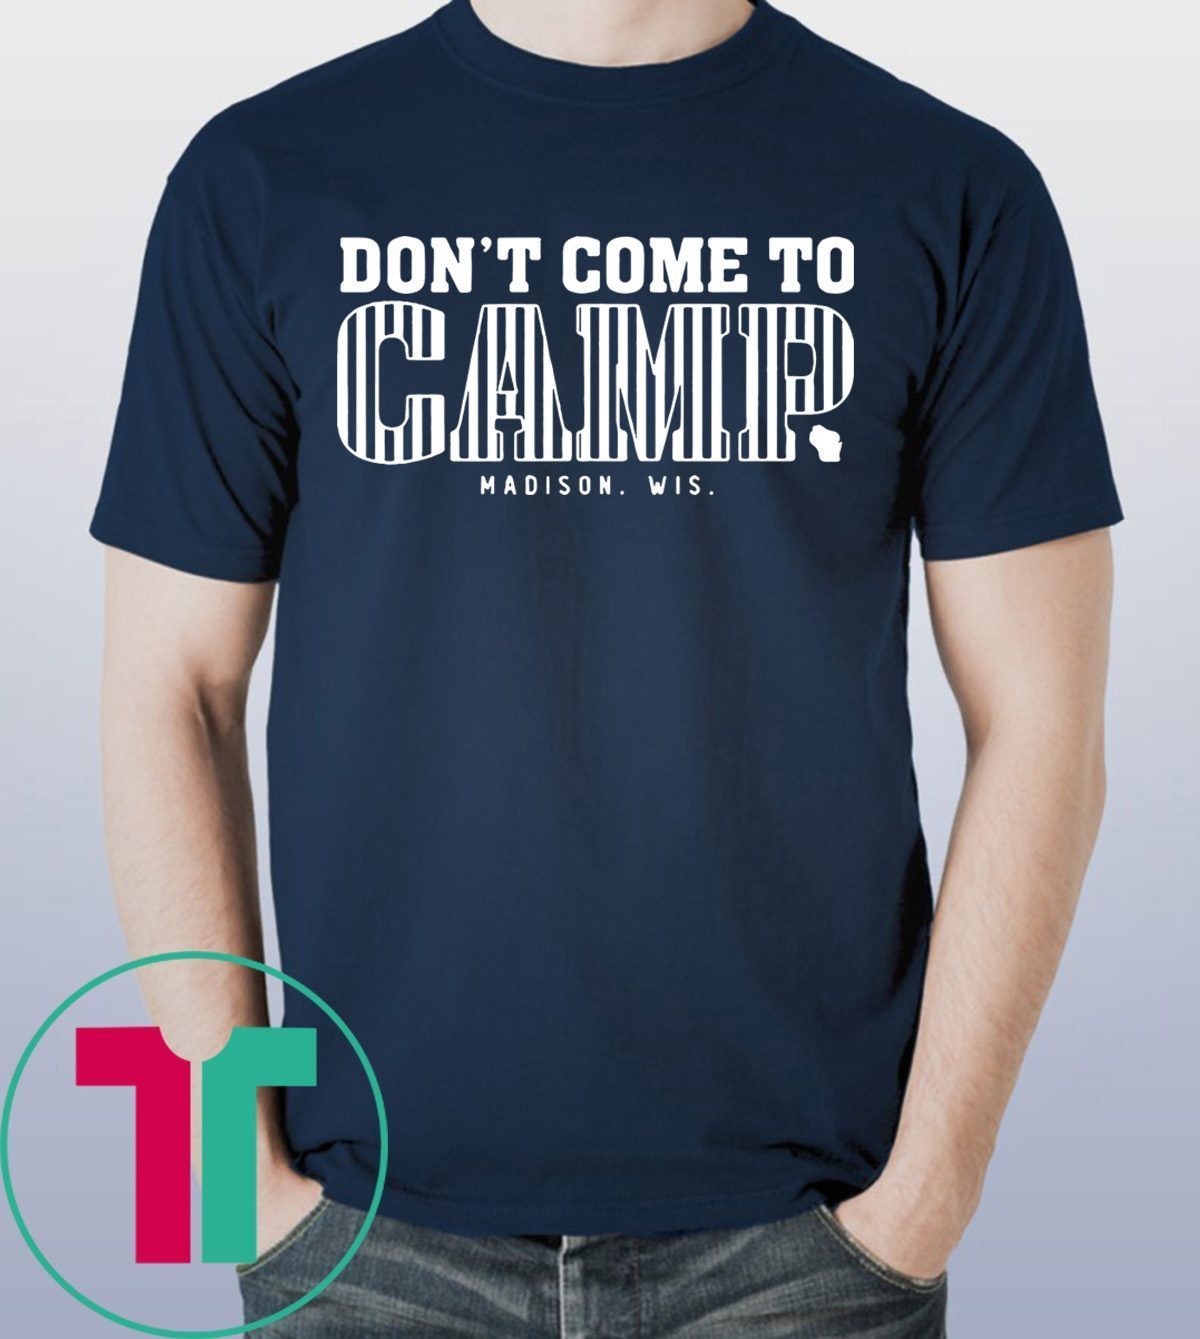 Don’t Come To Camp Shirt – Madison Football T-Shirt - Reviewshirts Office